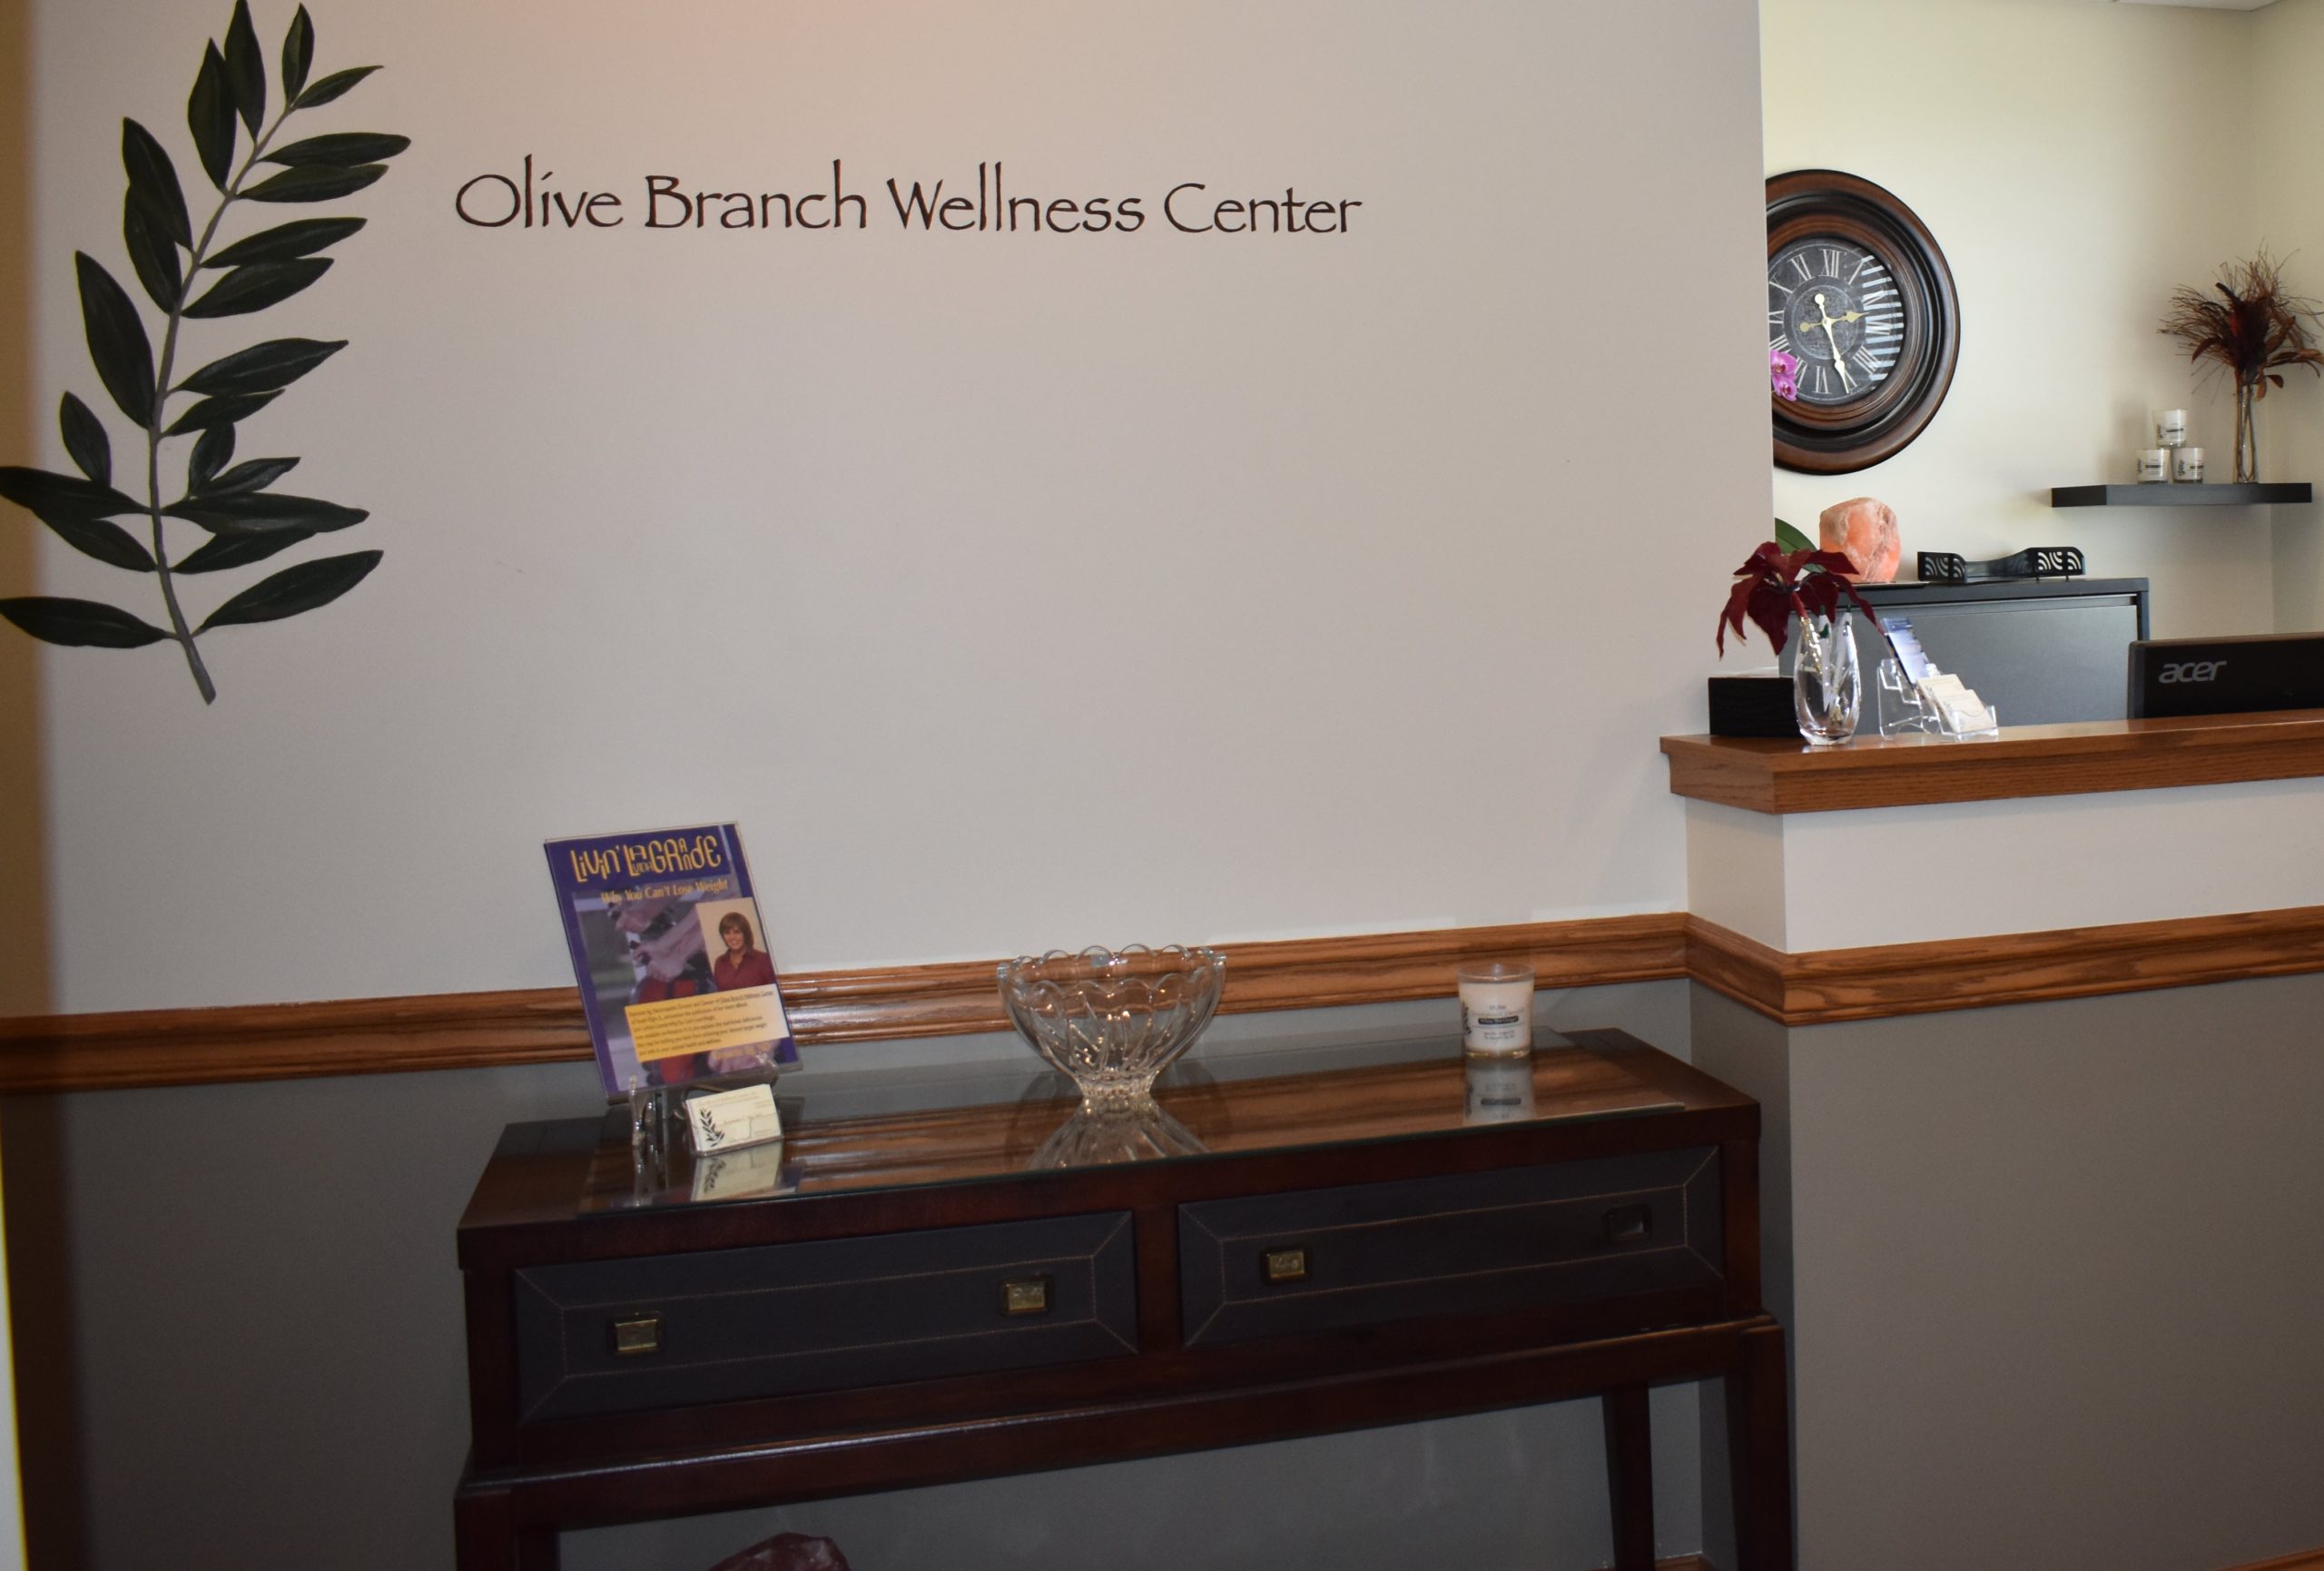 Why Do People Visit Wellness Centers?